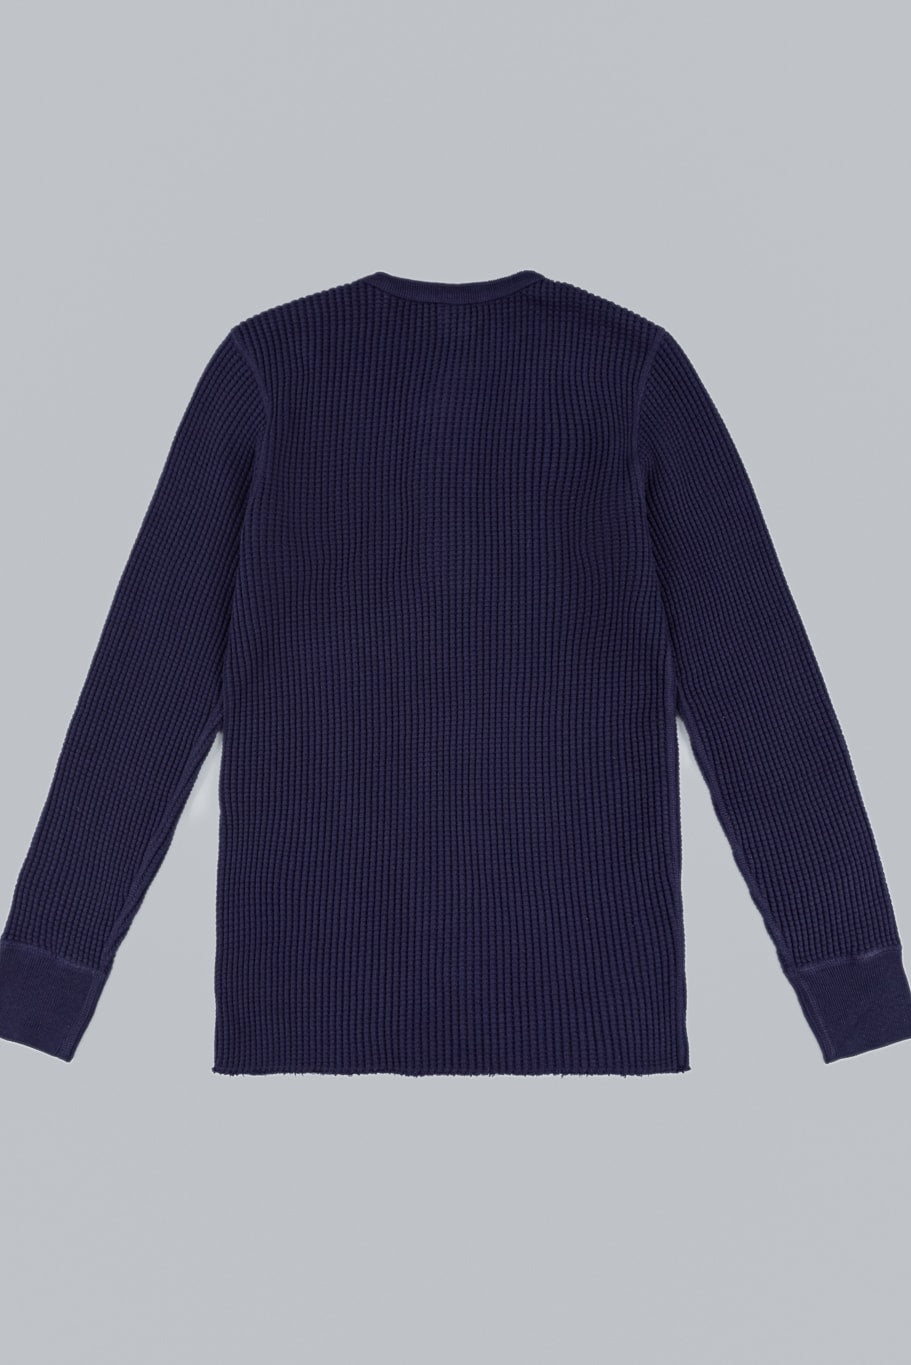  UES Thermal Waffle Long Sleeve Henley Navy back